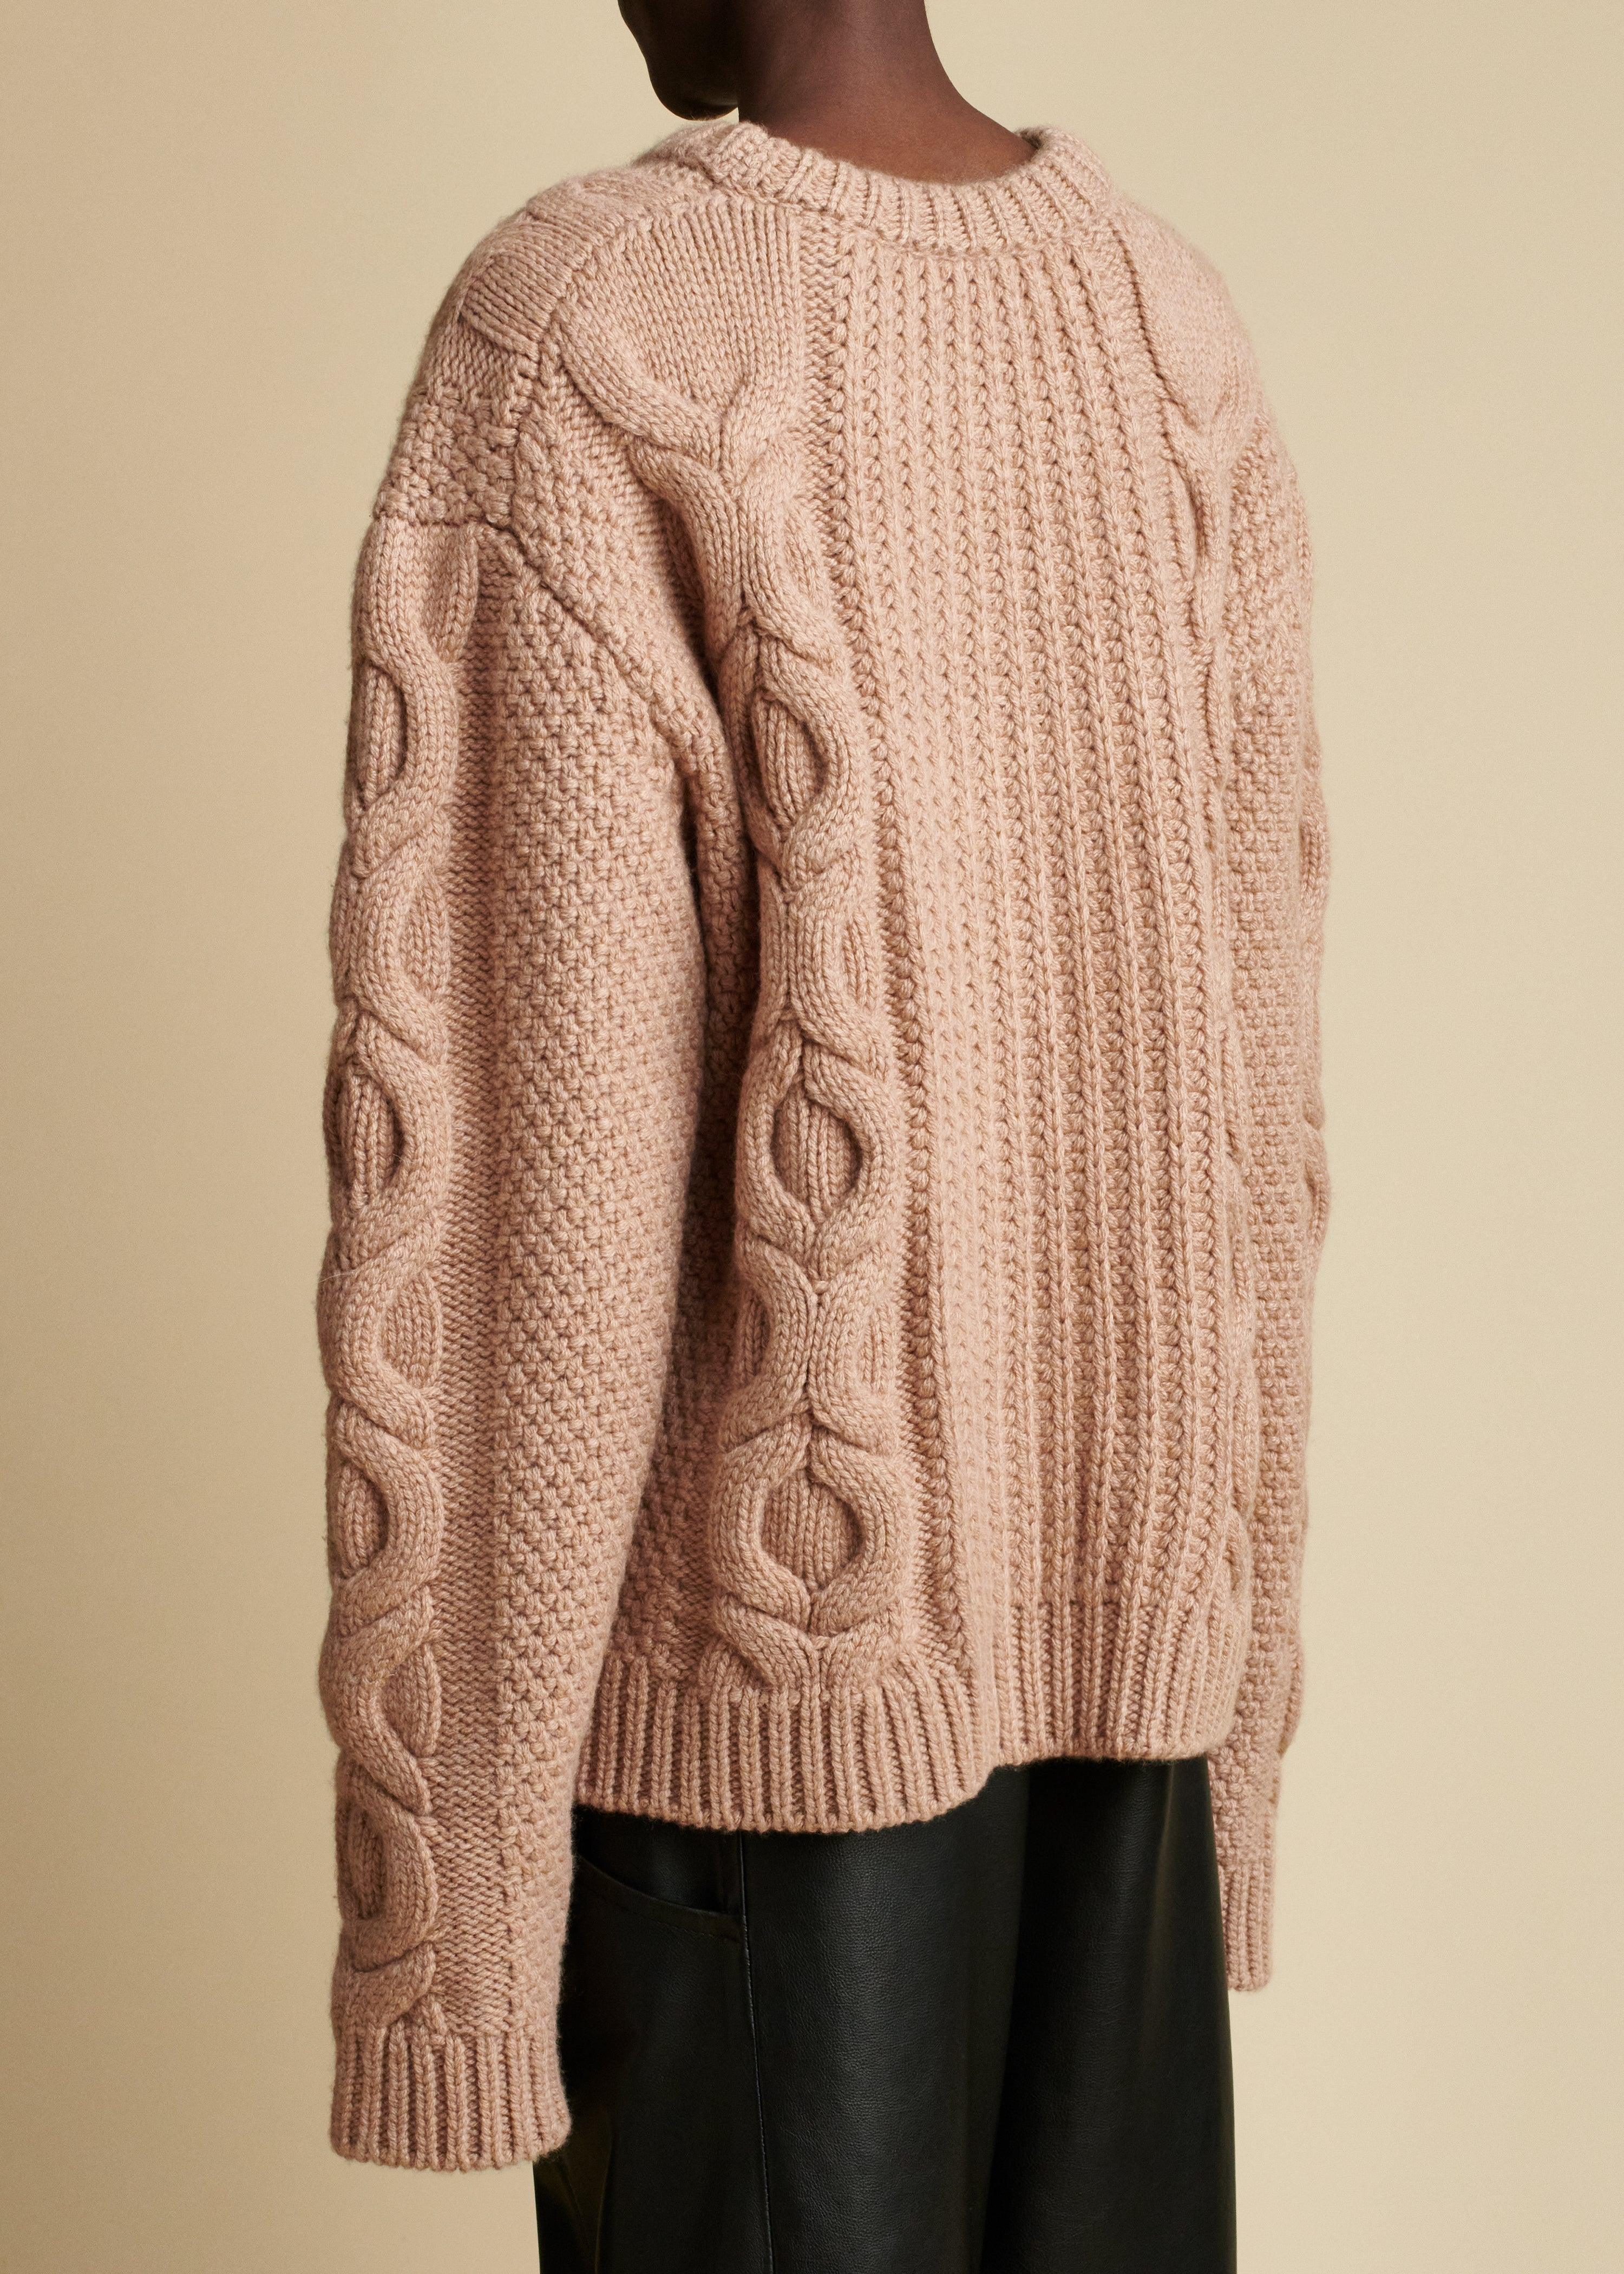 The Lupita Sweater in Almond - The Iconic Issue